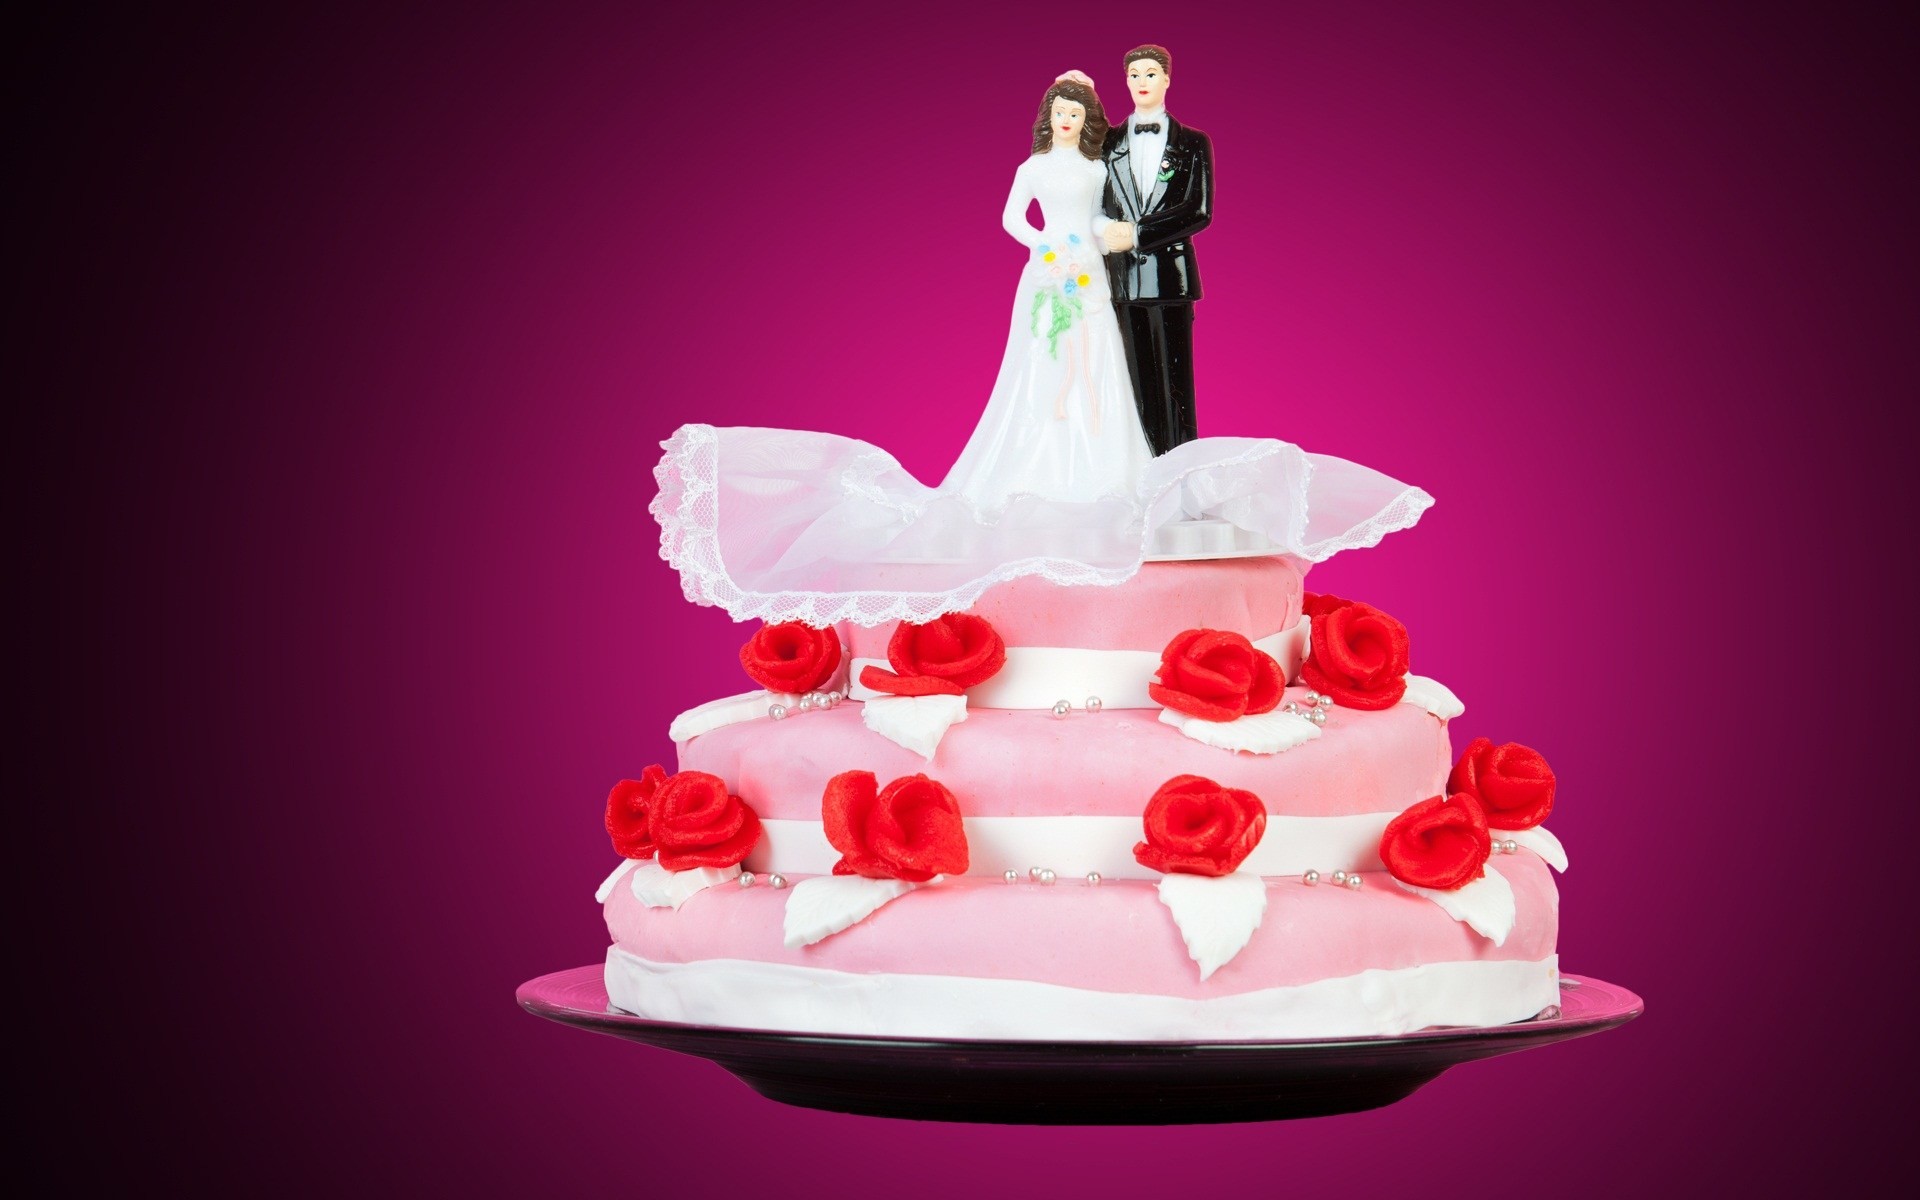 Happy Anniversary Gift Images Hd Wallpapers Special - Beautiful Happy Marriage Anniversary Cake - HD Wallpaper 